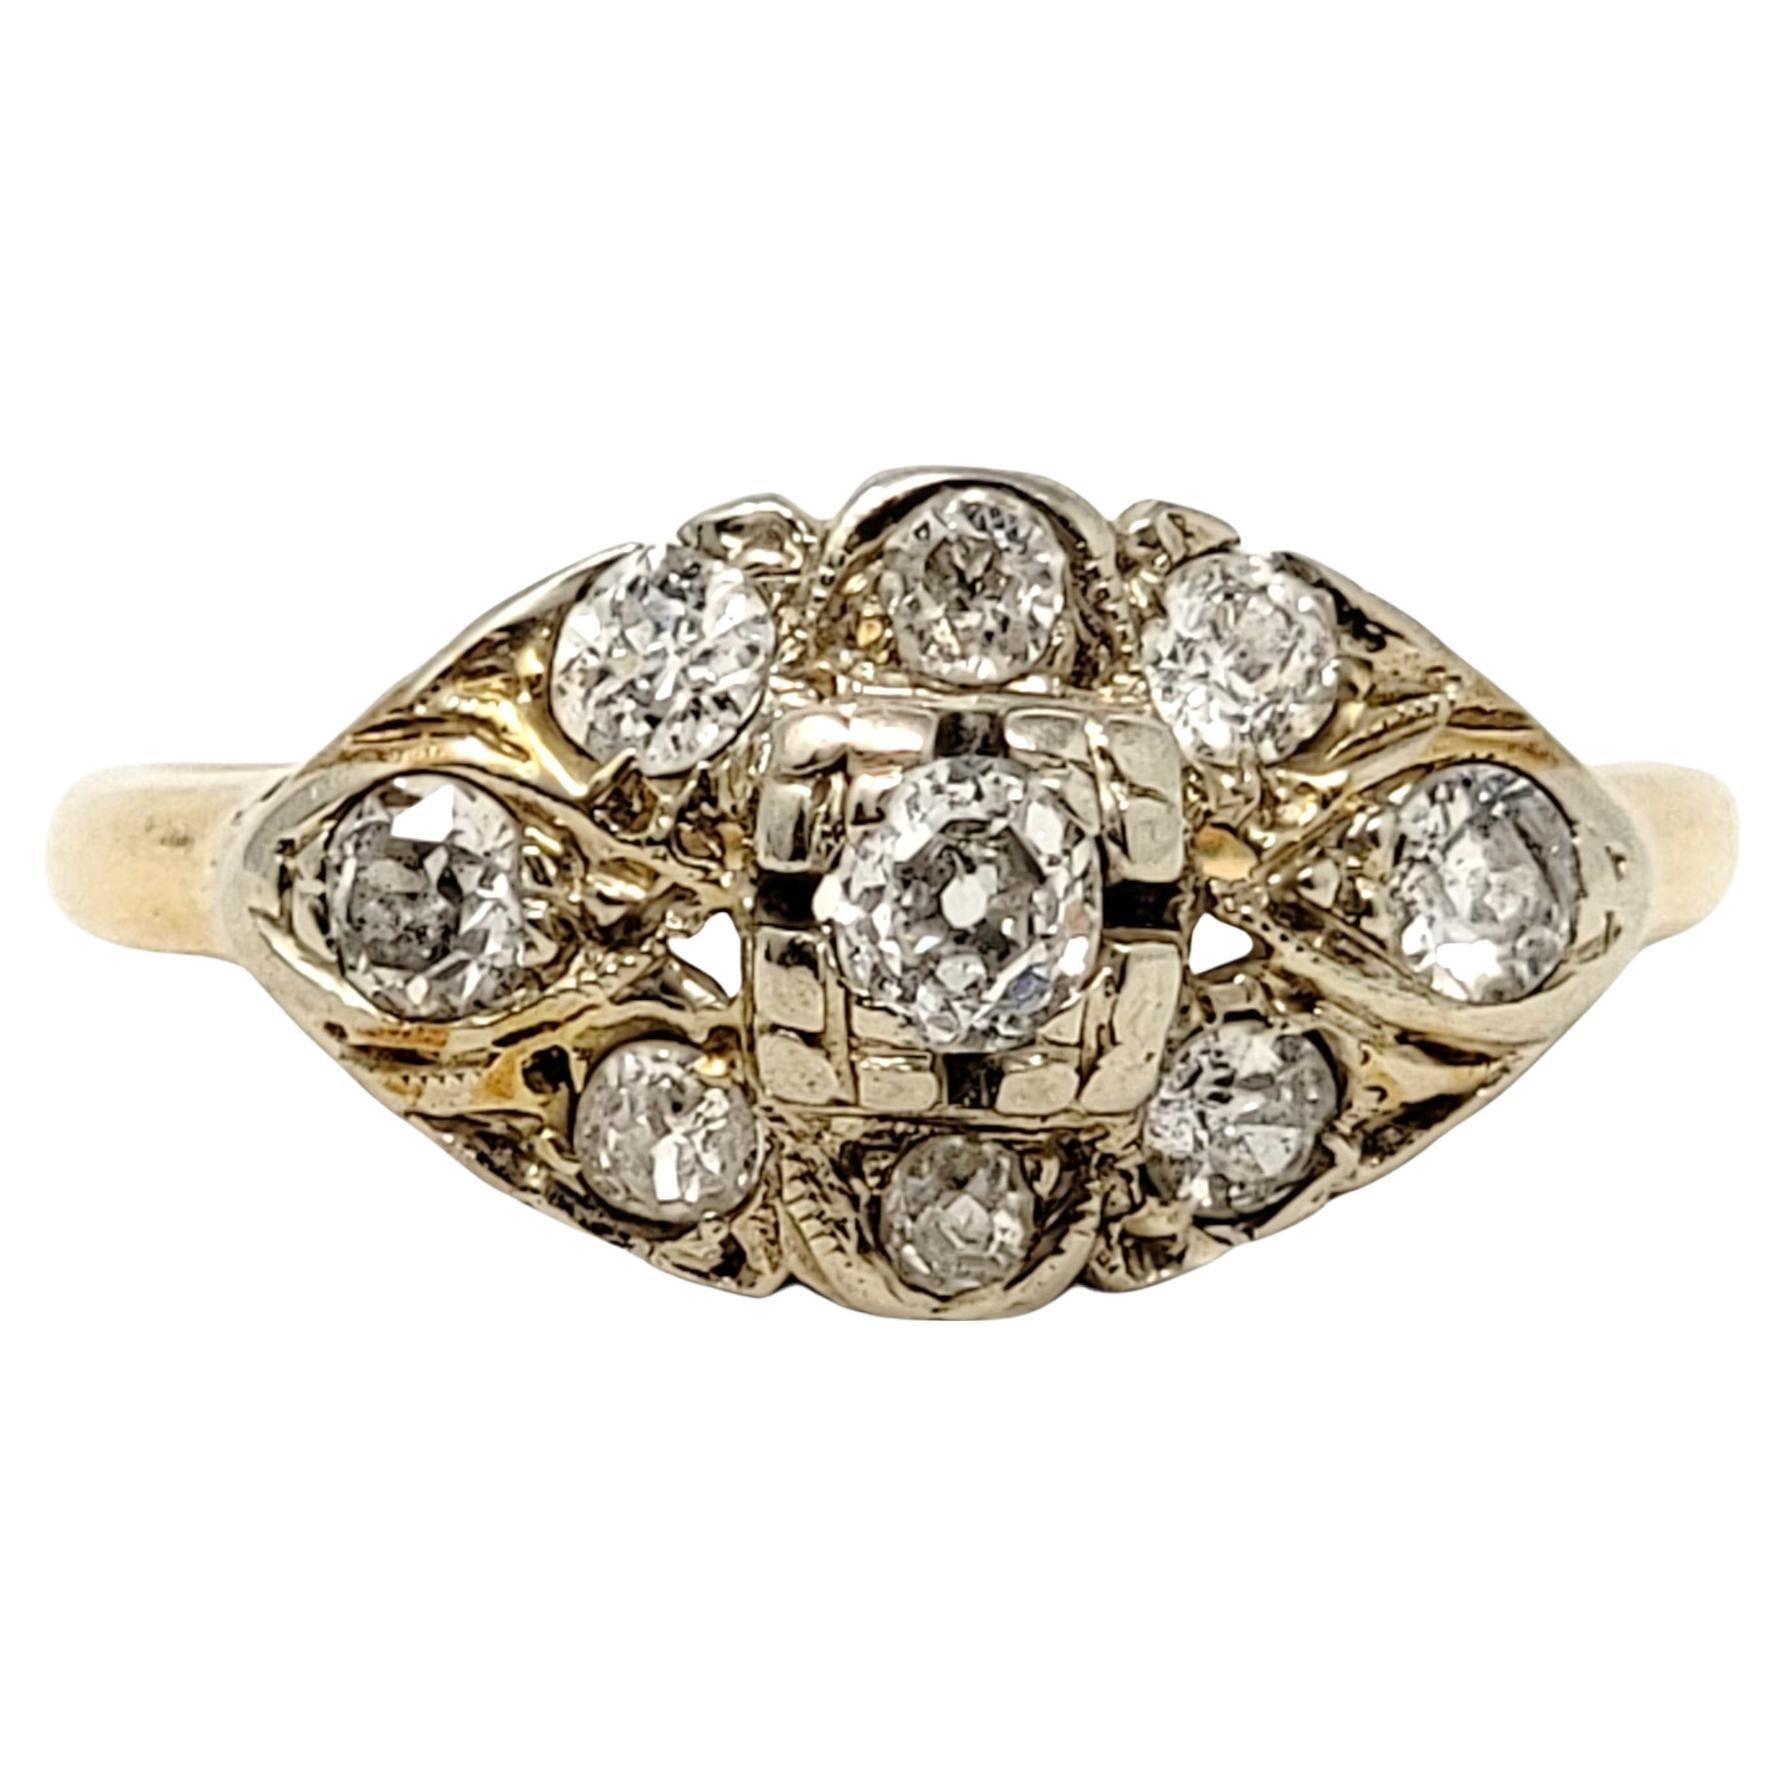 Antique Old Mine Cut Diamond Cluster Band Ring in 14 Karat Yellow Gold